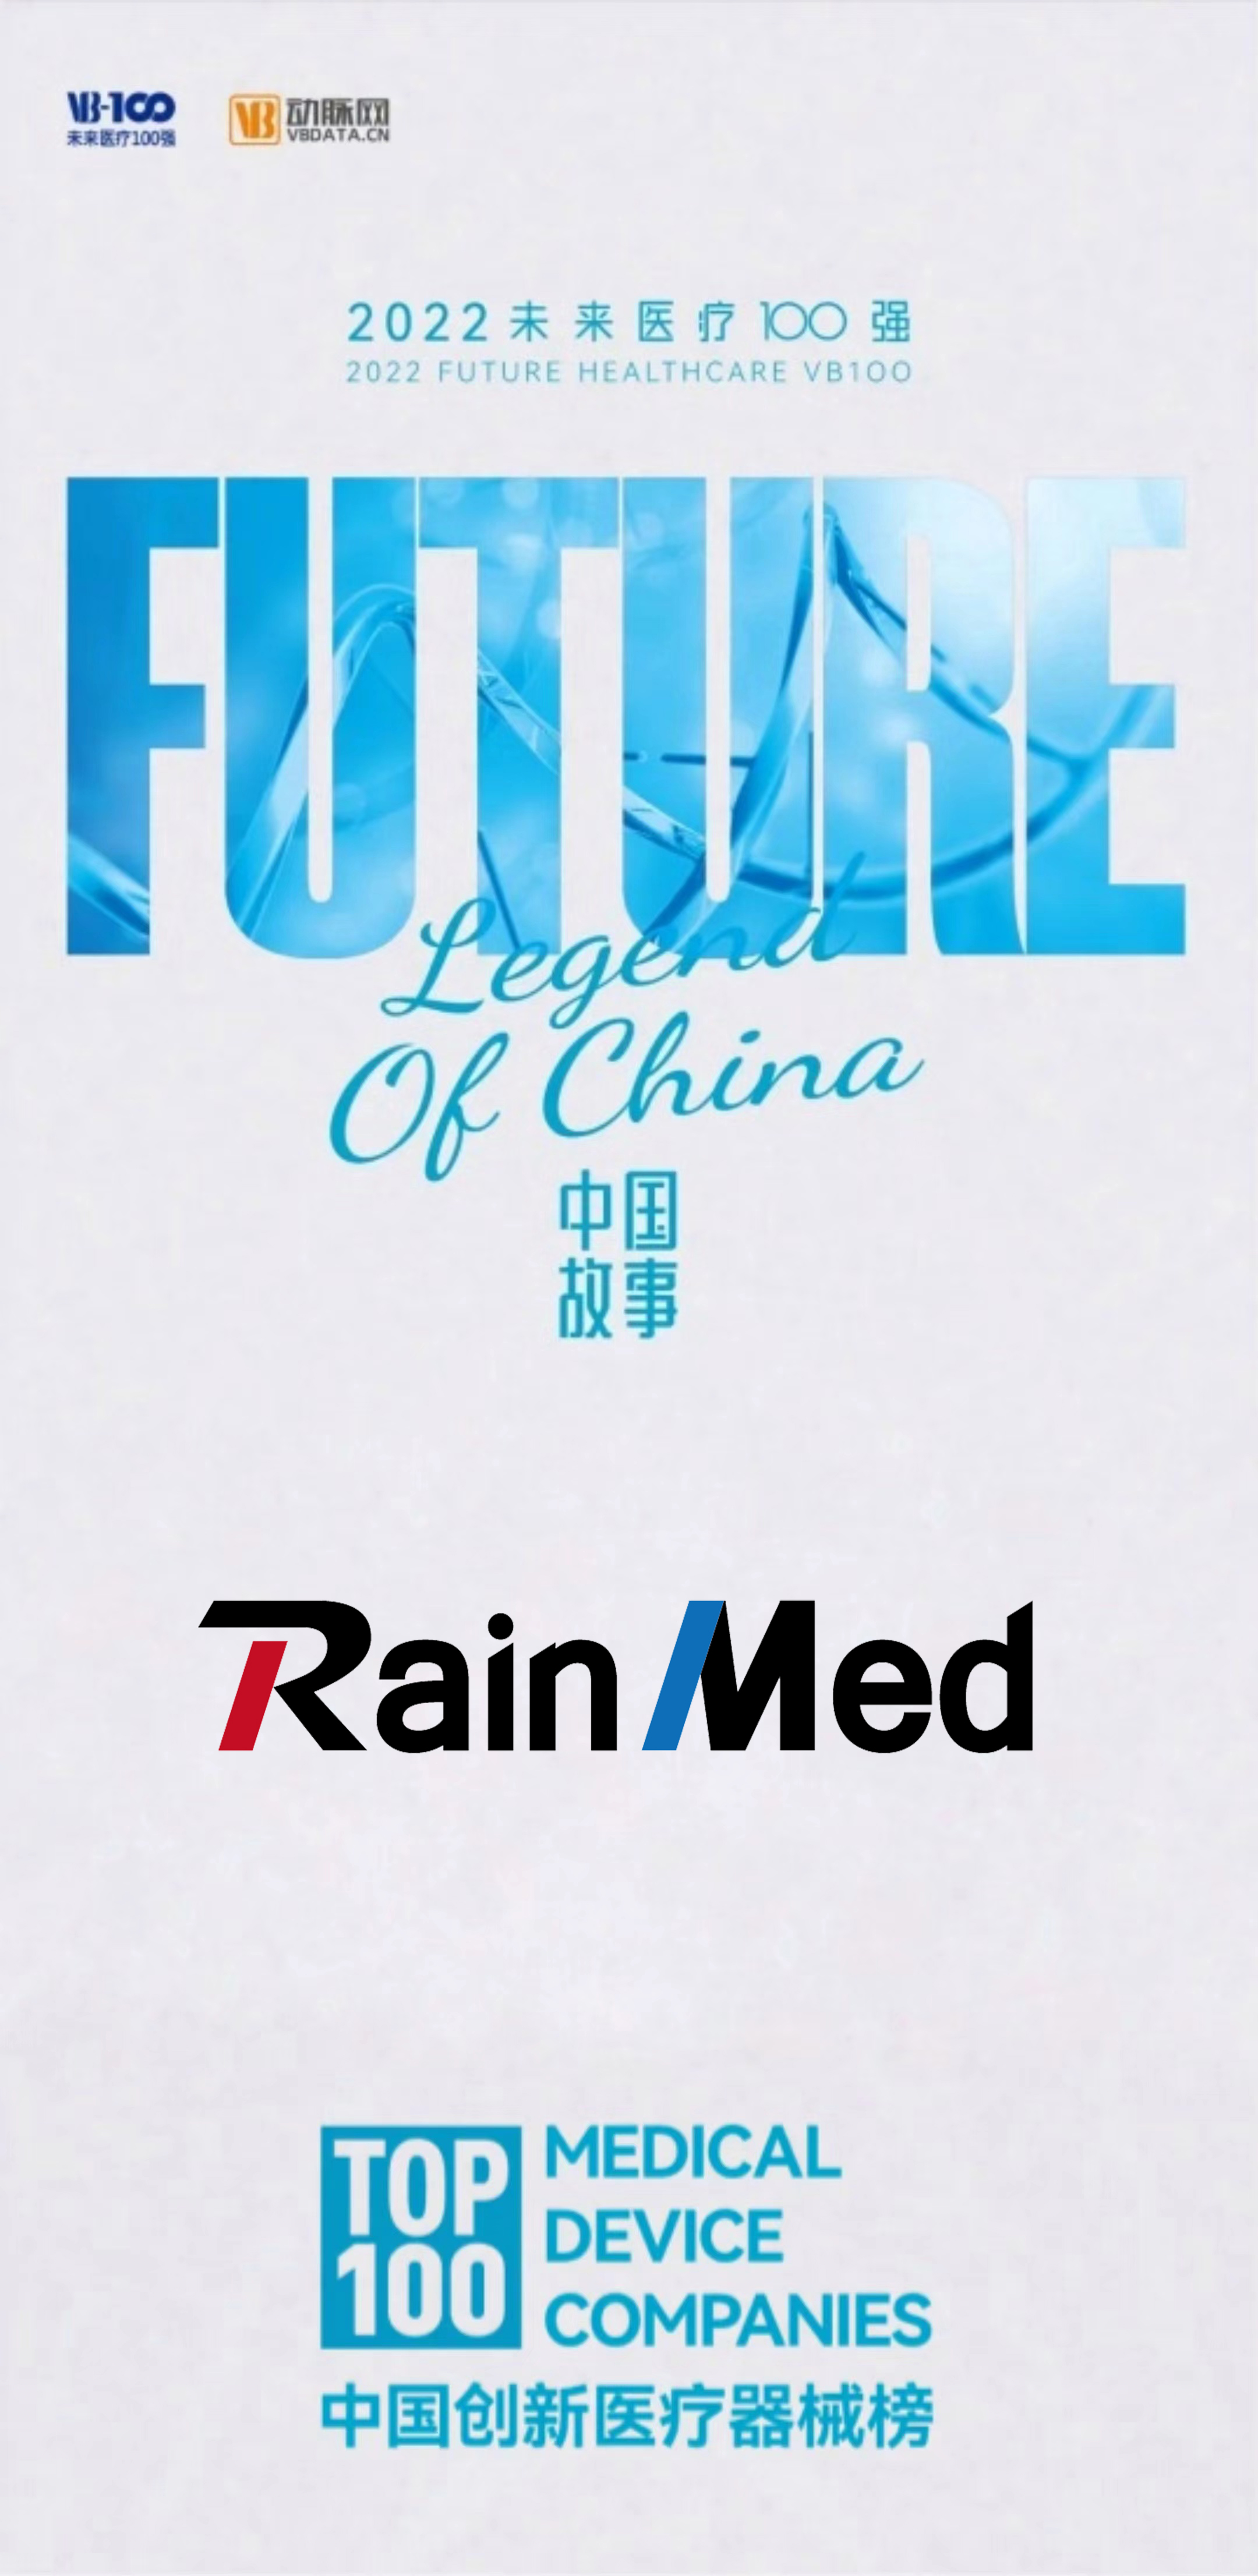 RainMed Medical Entered "TOP100 MEDICAL DEVICE COMPANIES"